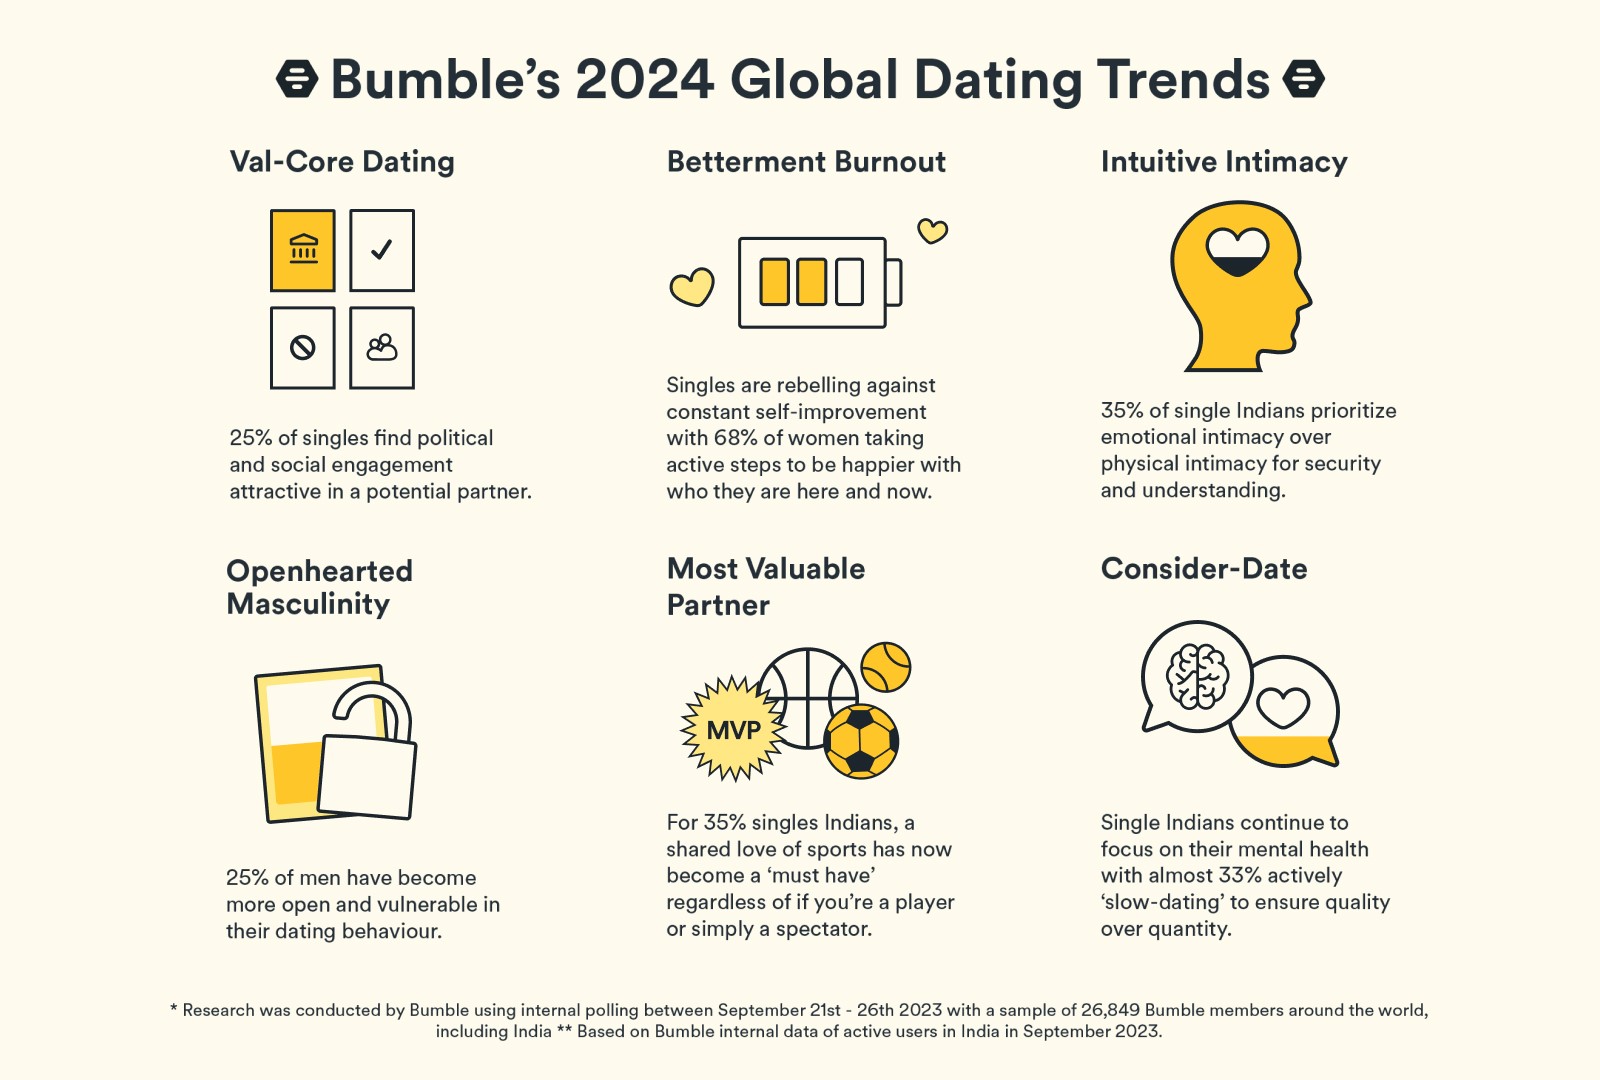 Bumble Reveals 2024 Dating Trends